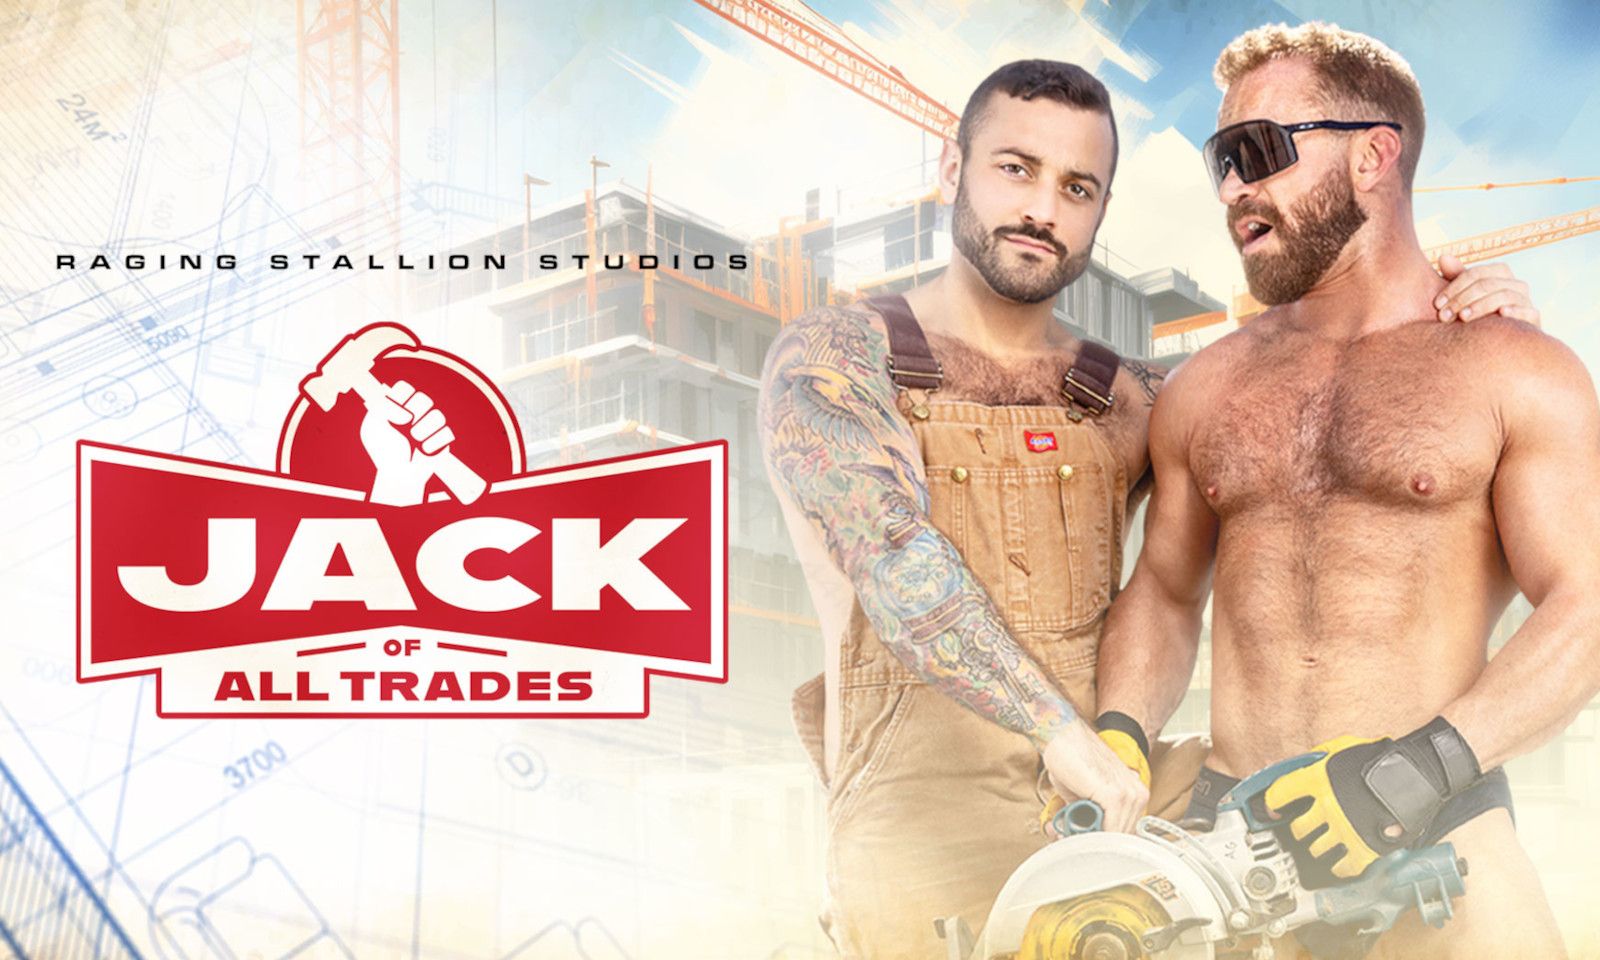 Raging Stallion Debuts 'Jack of All Trades' on DVD, VOD